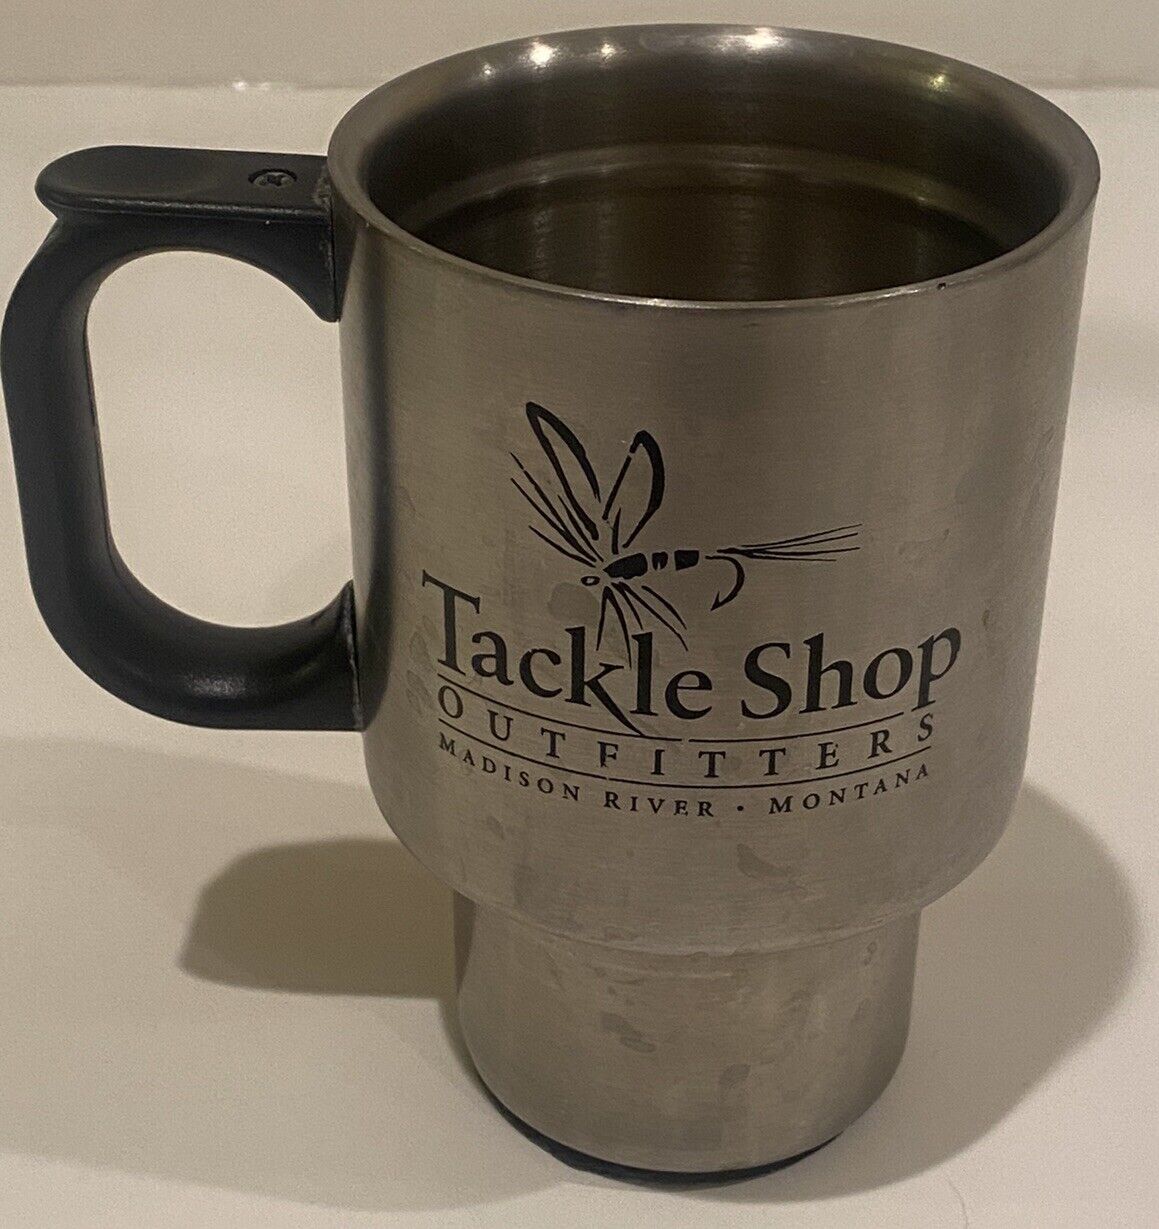 Vintage Insulated Beverage Mug - Tackle Shop Outfitters - Madison River, Montana